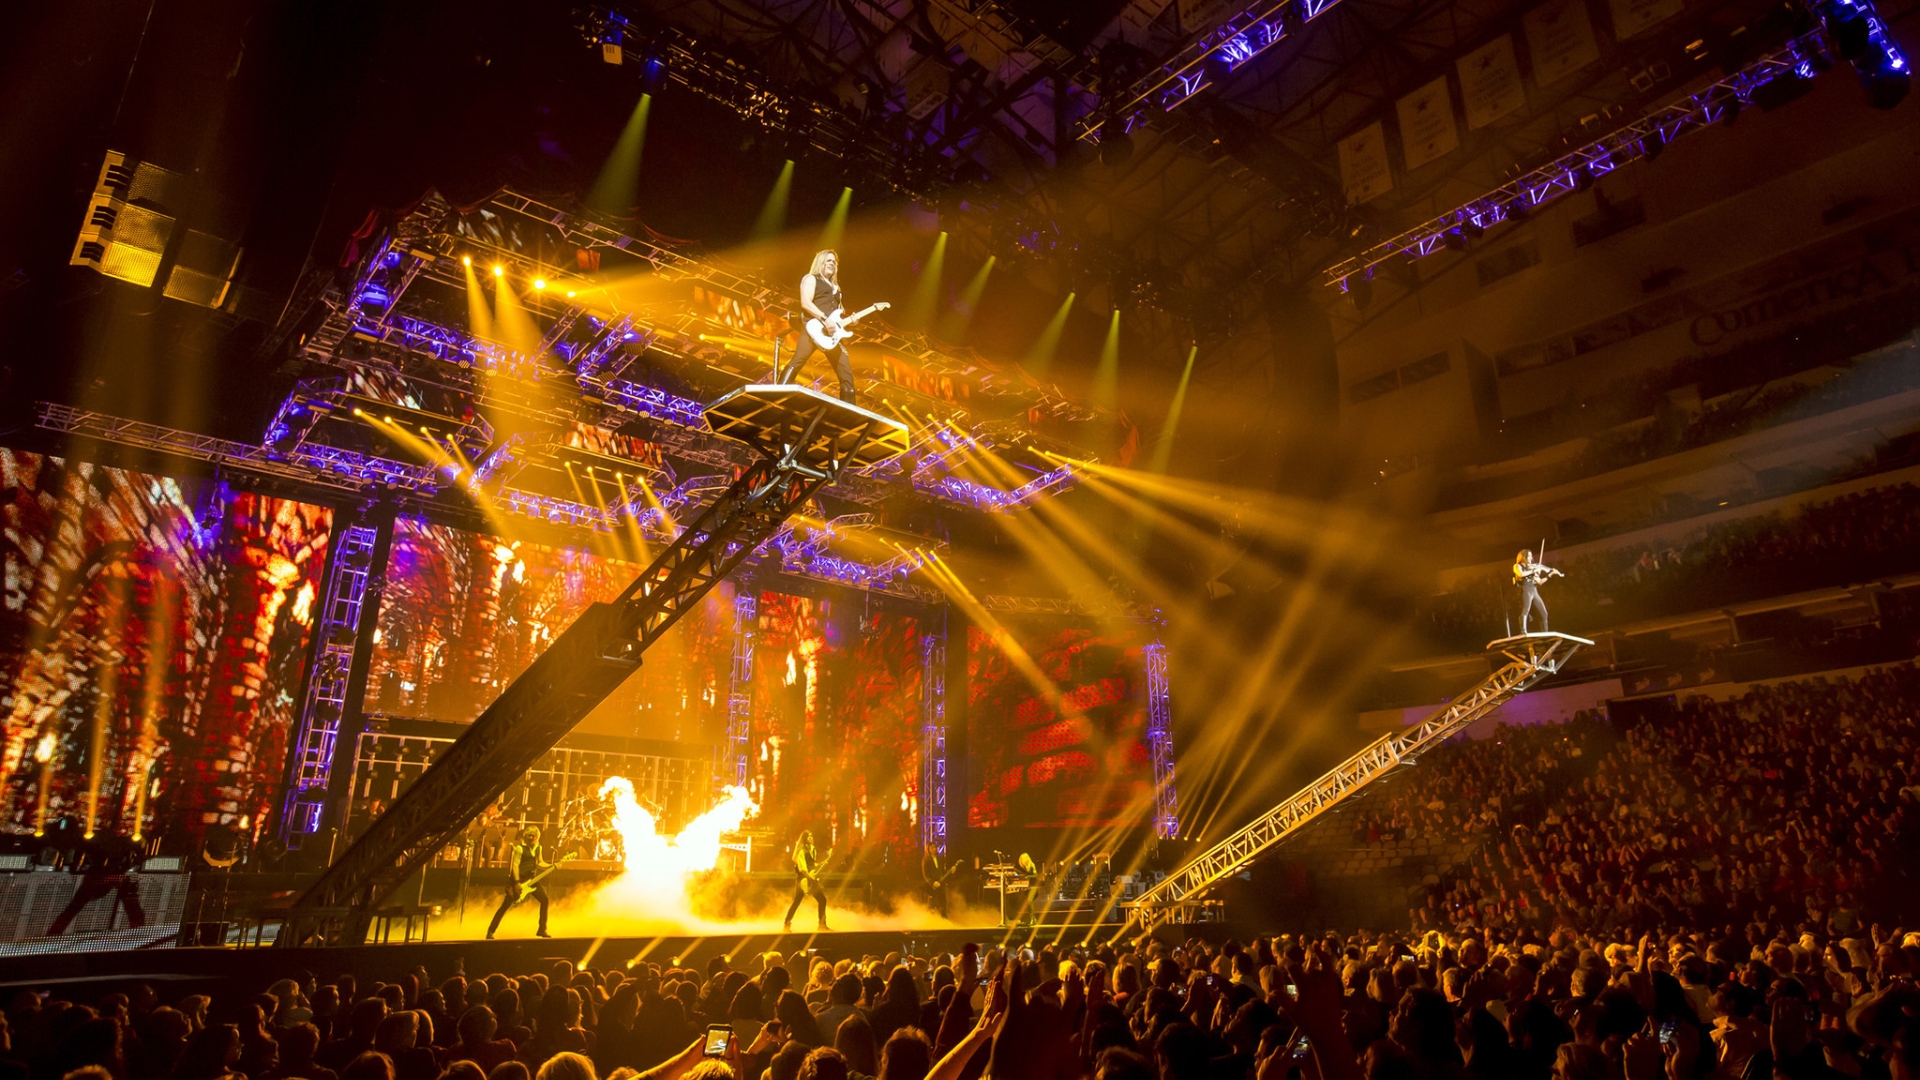 Interview: Trans-Siberian Orchestra founder Paul O'Neill on giving